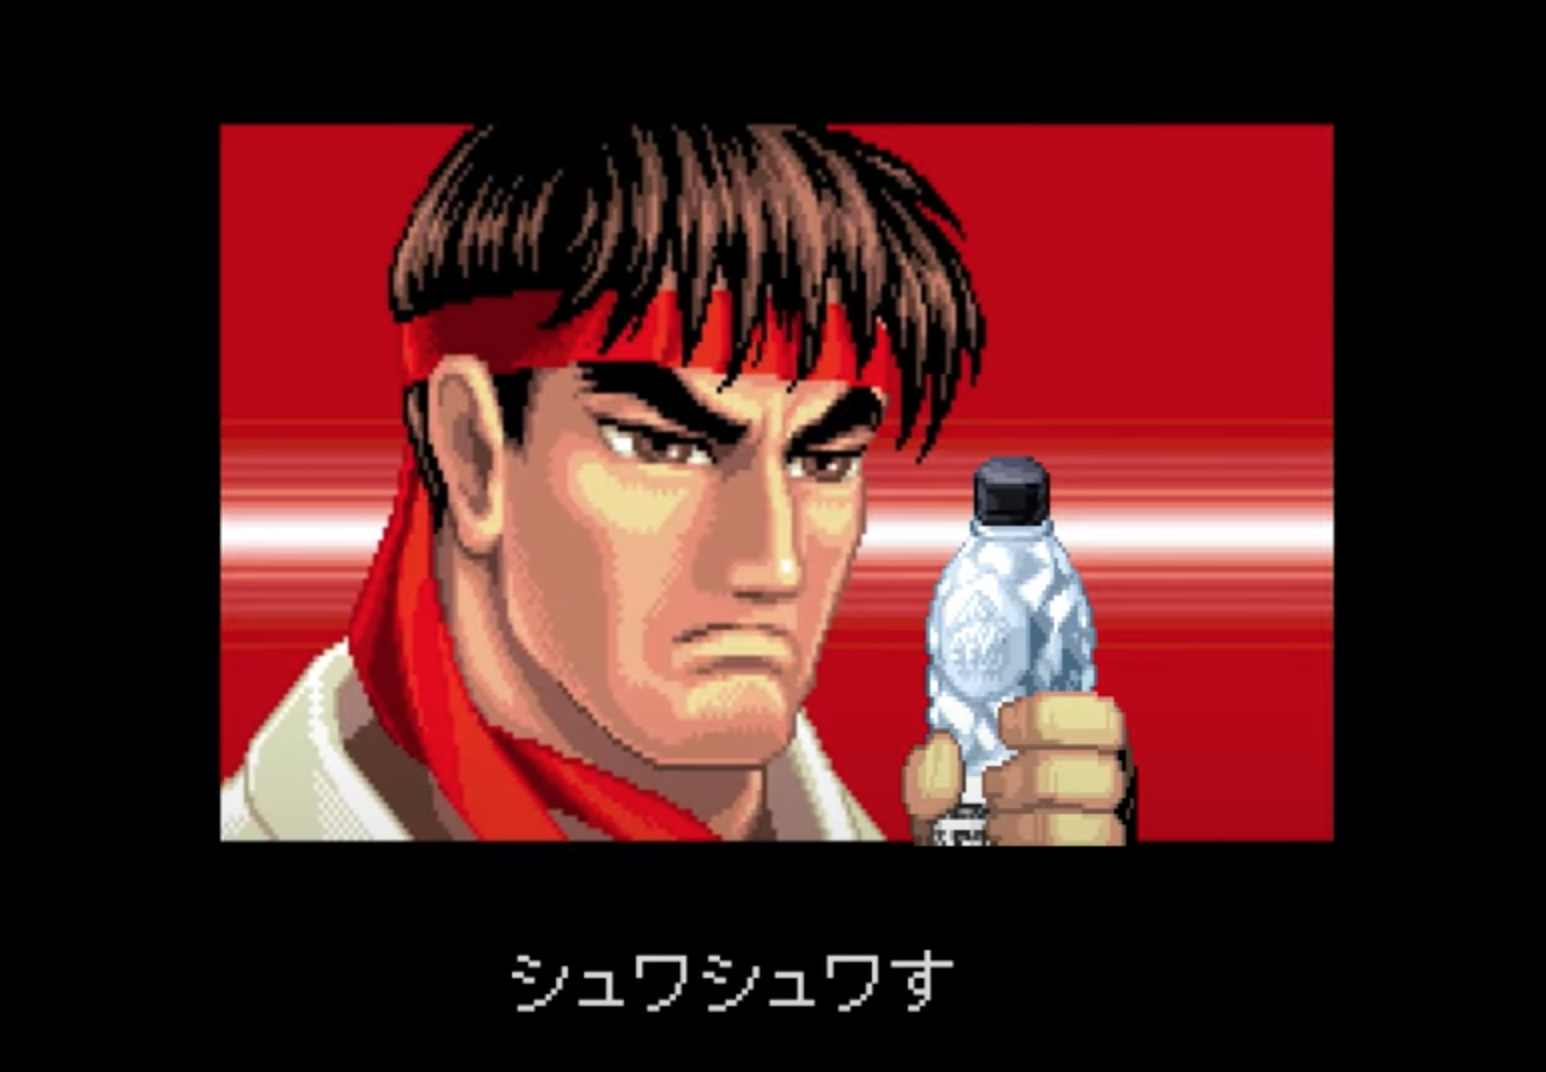 My favorite drink is water with no ice and my favorite game is Street  Fighter - King of Posters - selectbutton 2